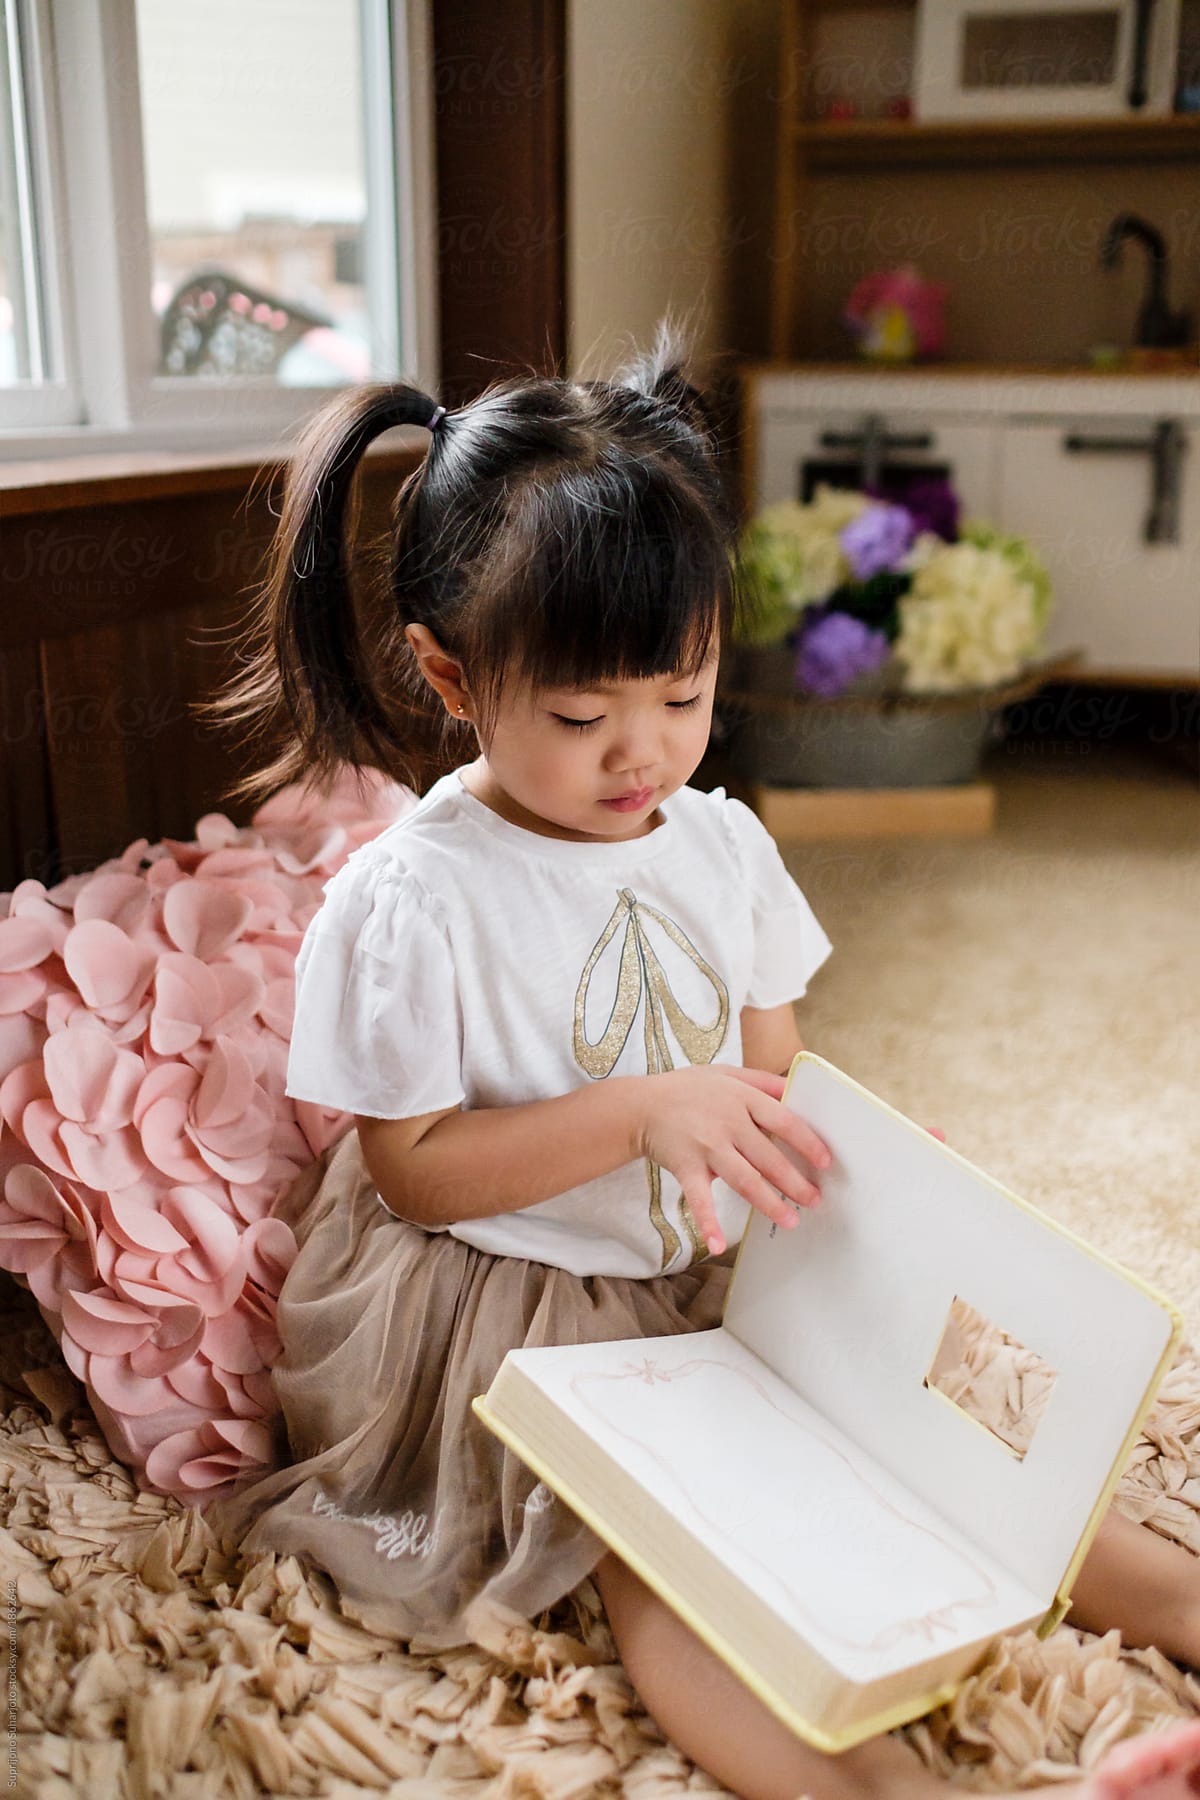 Asian Toddler Girl Reading A Book At Home by Stocksy Contributor Take A  Pix Media - Stocksy